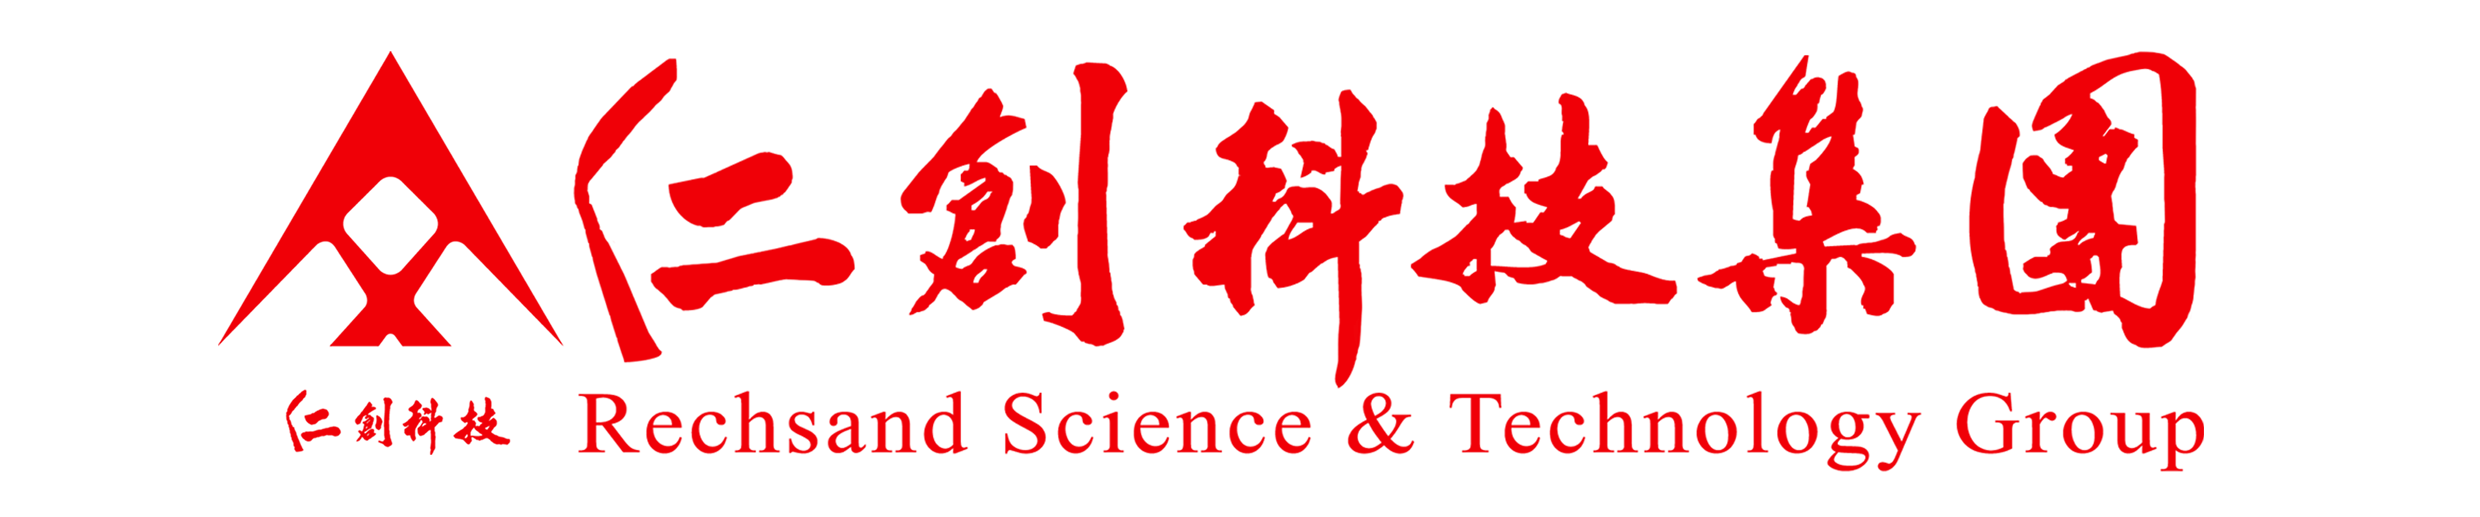 Beijing Renchuang Technology Group Co., Ltd.